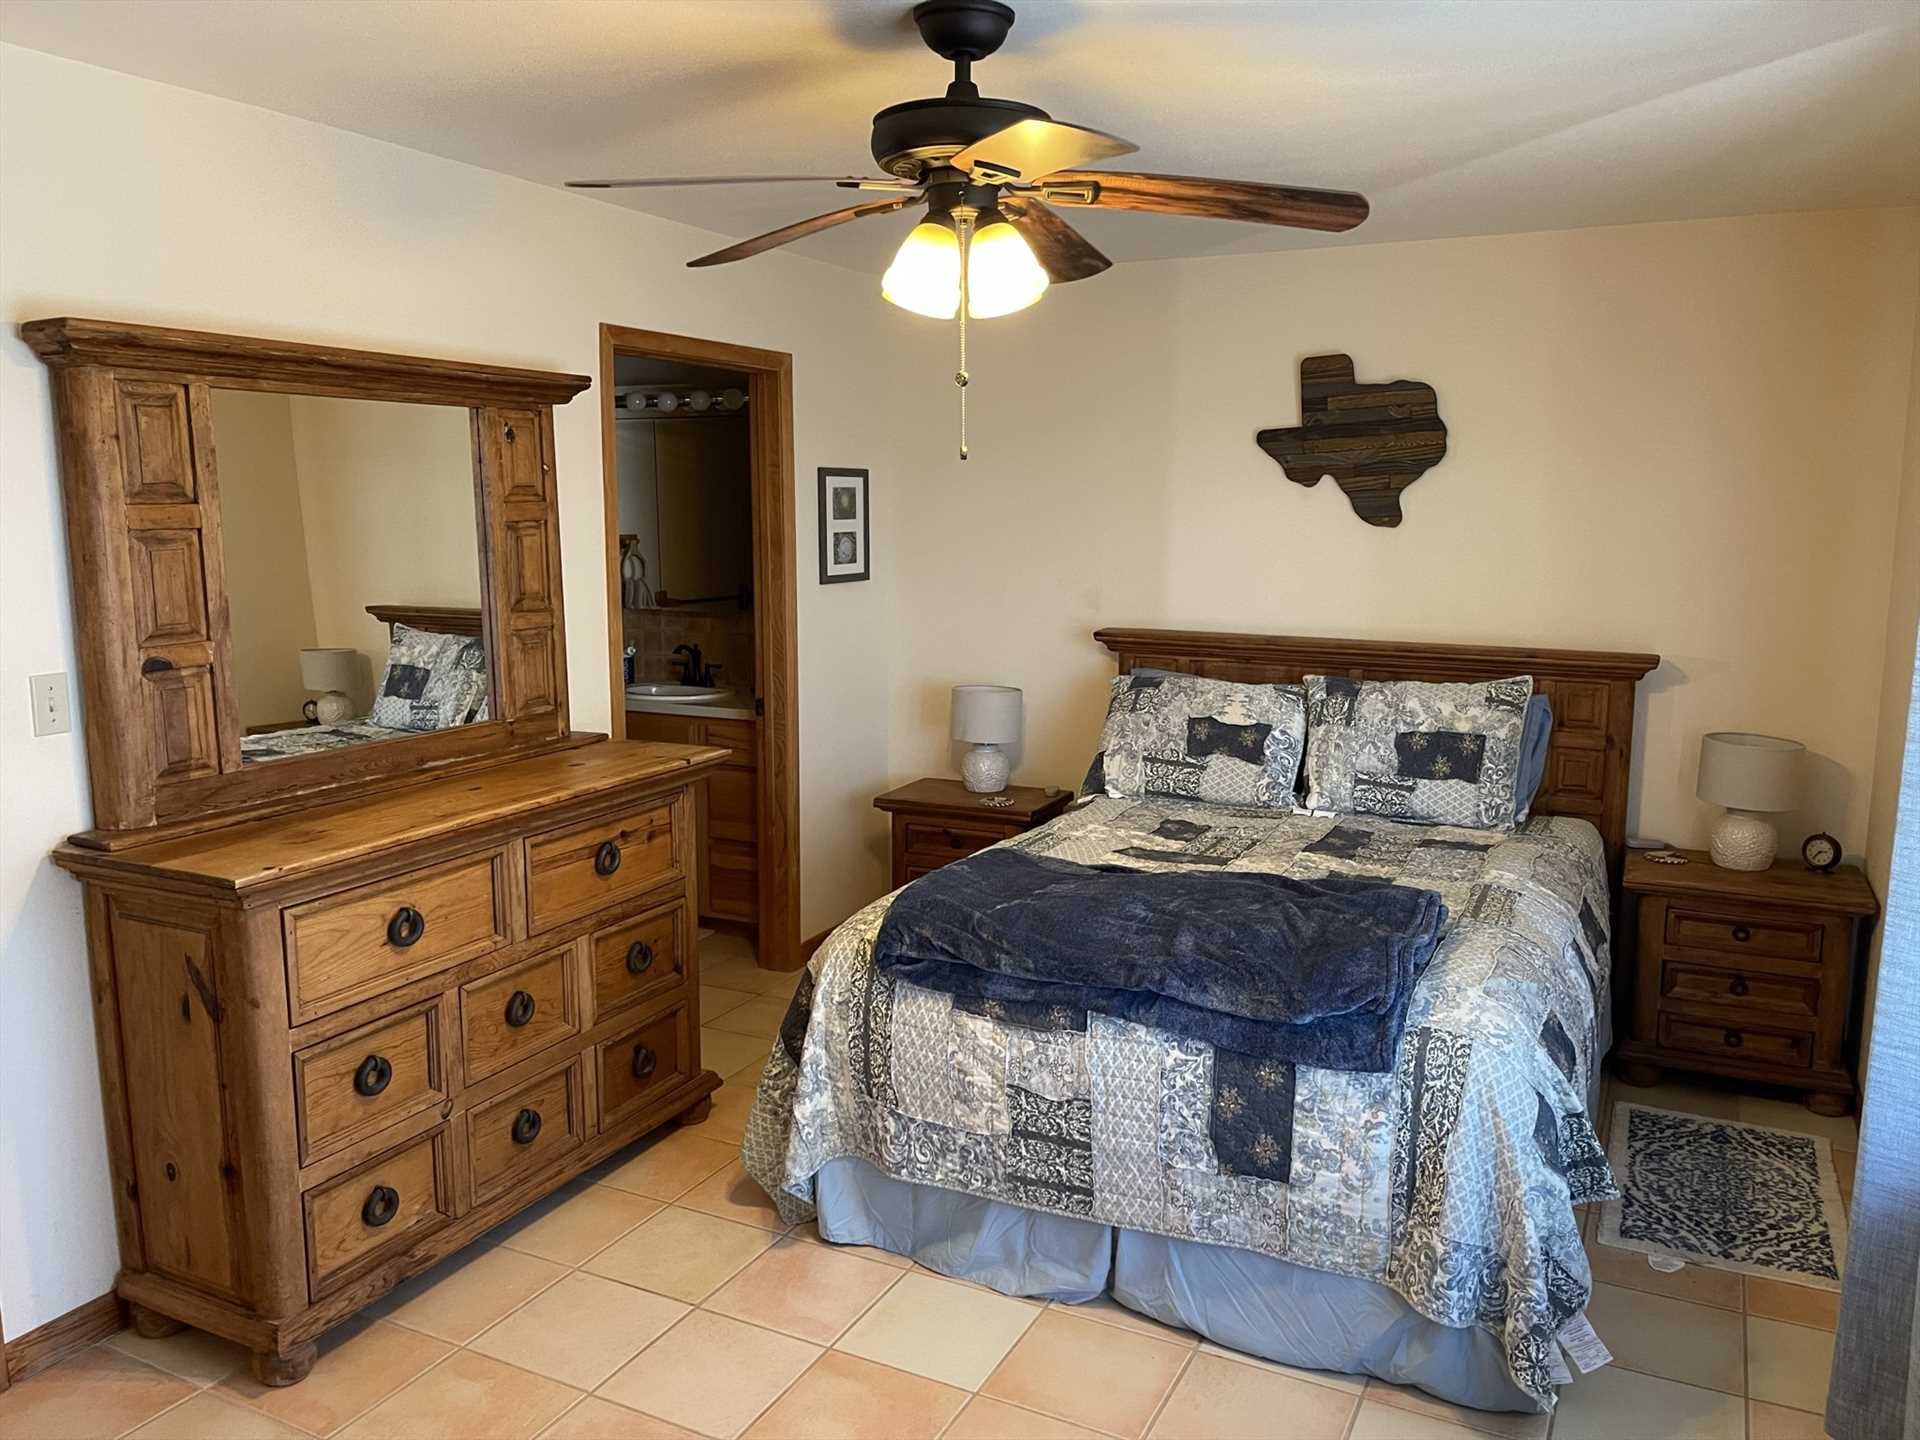                                                 The master bedroom has a comfy queen bed and its own adjoining full bath! All bed and bath linens at the cabin are provided for your stay, too.